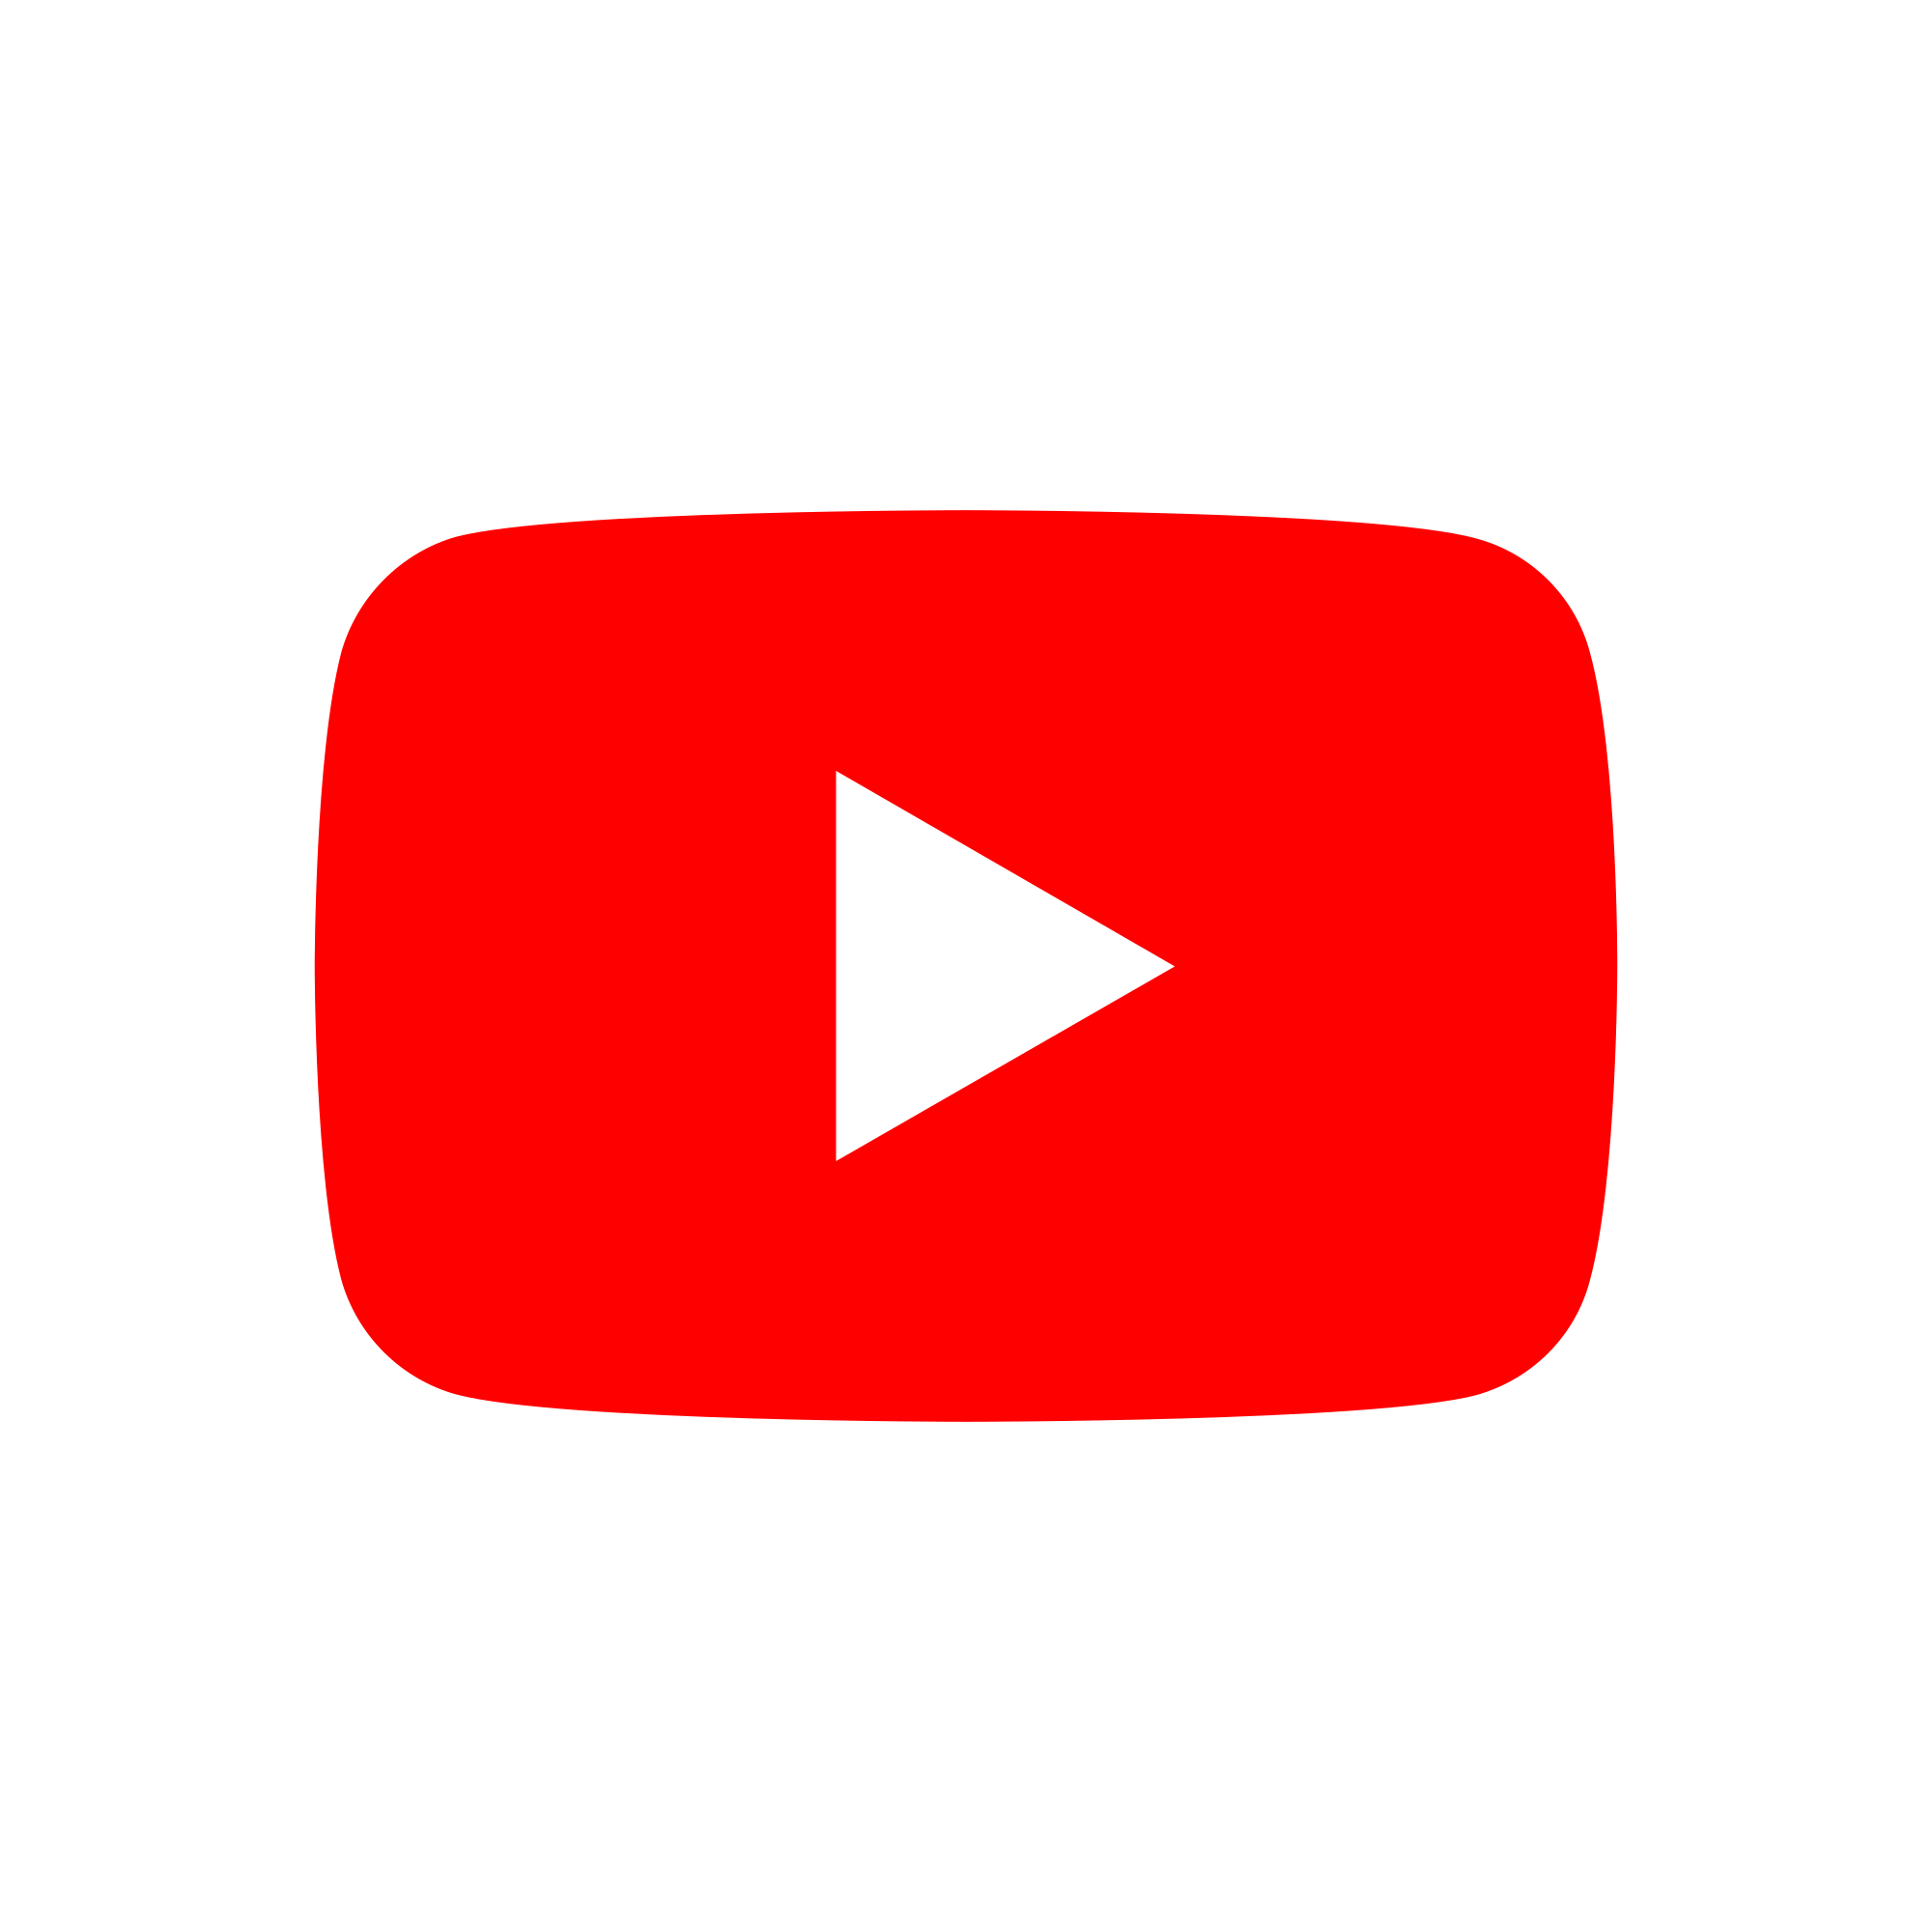 Red and White Square Logo - File:YouTube social white square (2017).svg - Wikimedia Commons